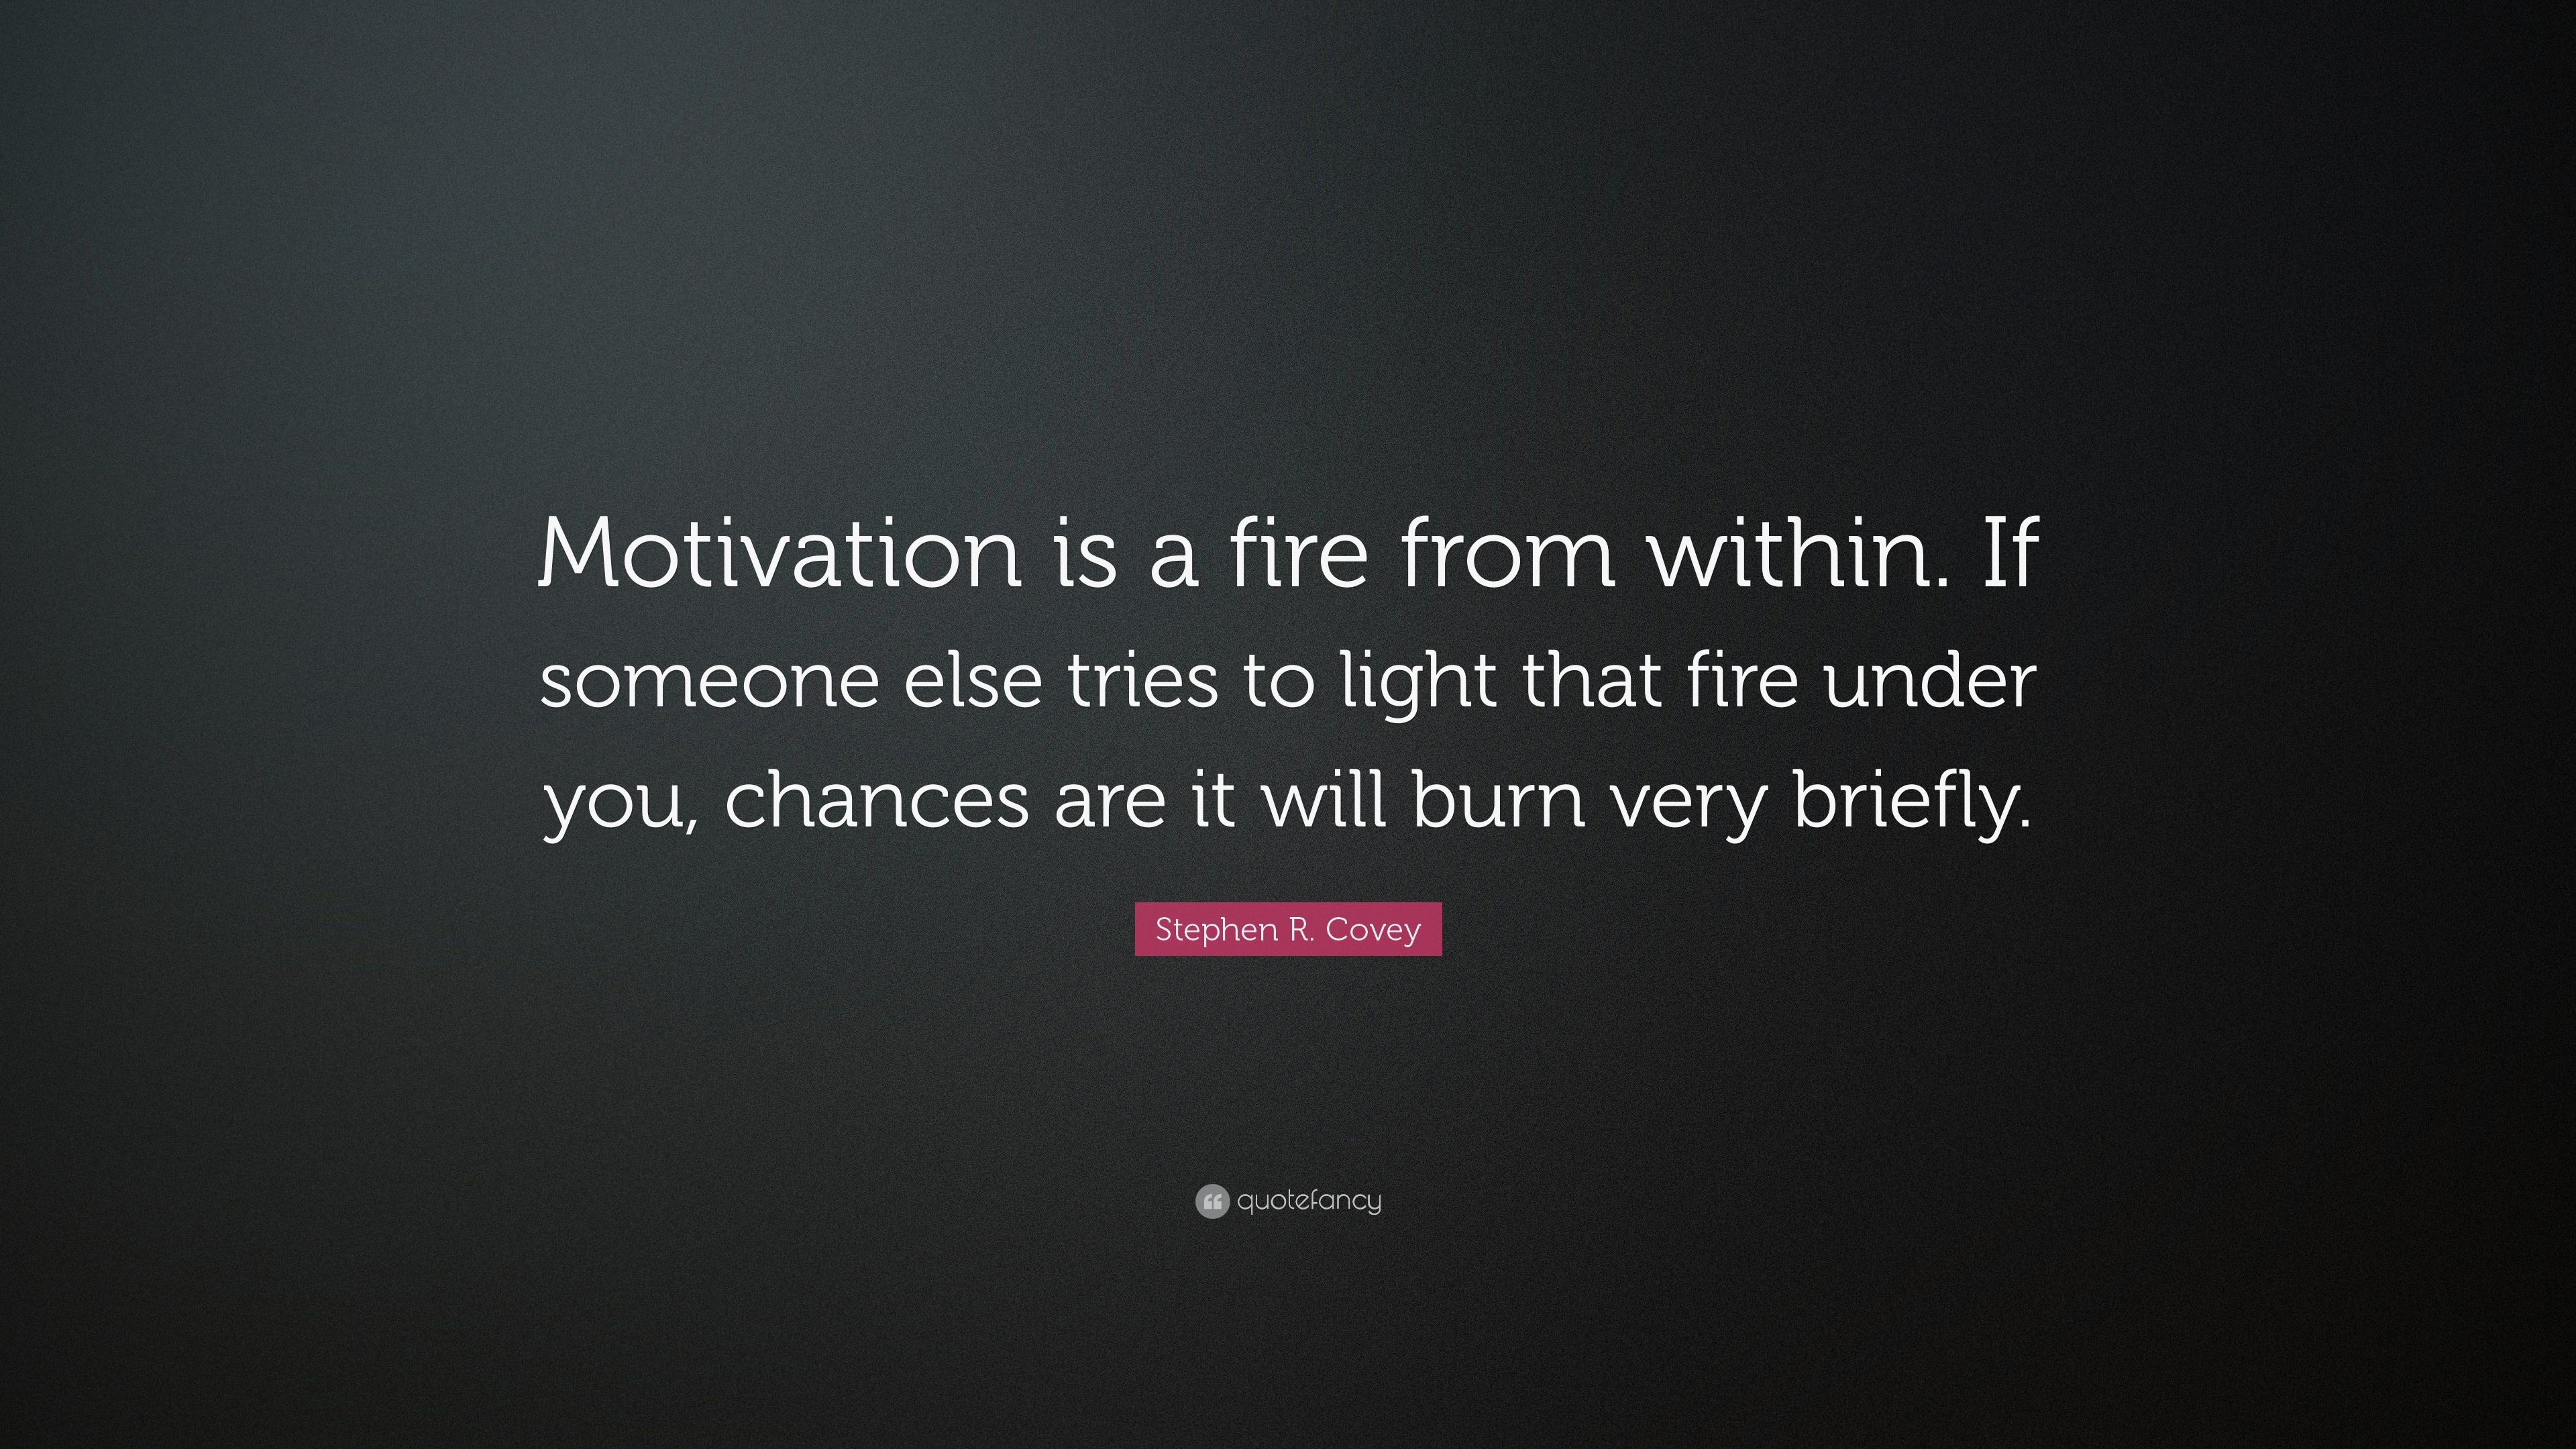 Stephen R. Covey Quote: “Motivation is a fire from within. If someone